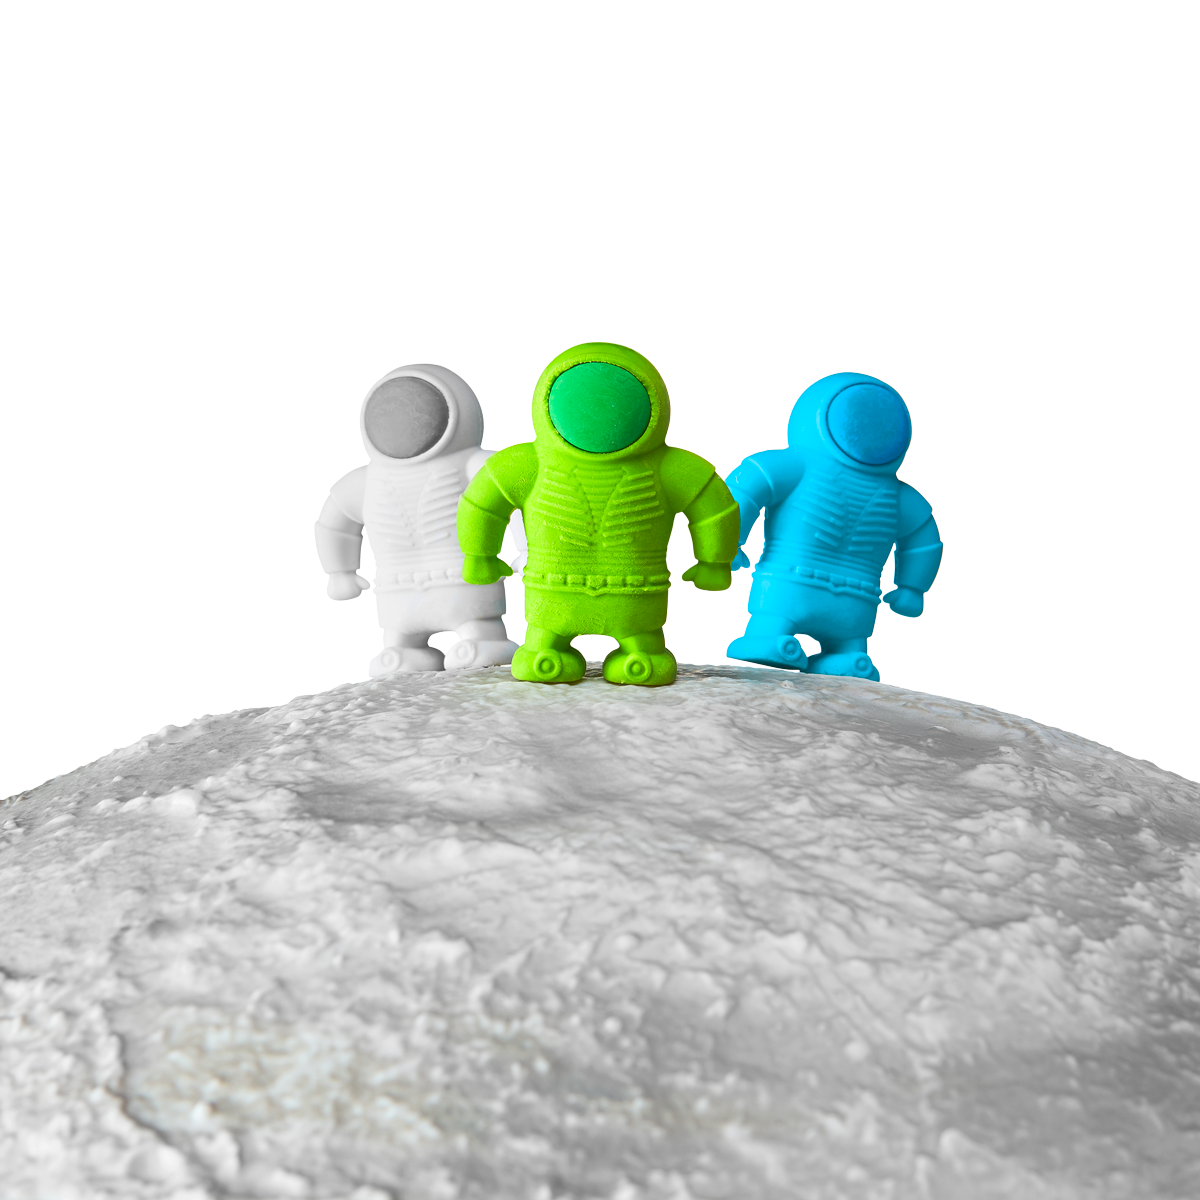 3 Astronaut Erasers shown standing on a planet top edge